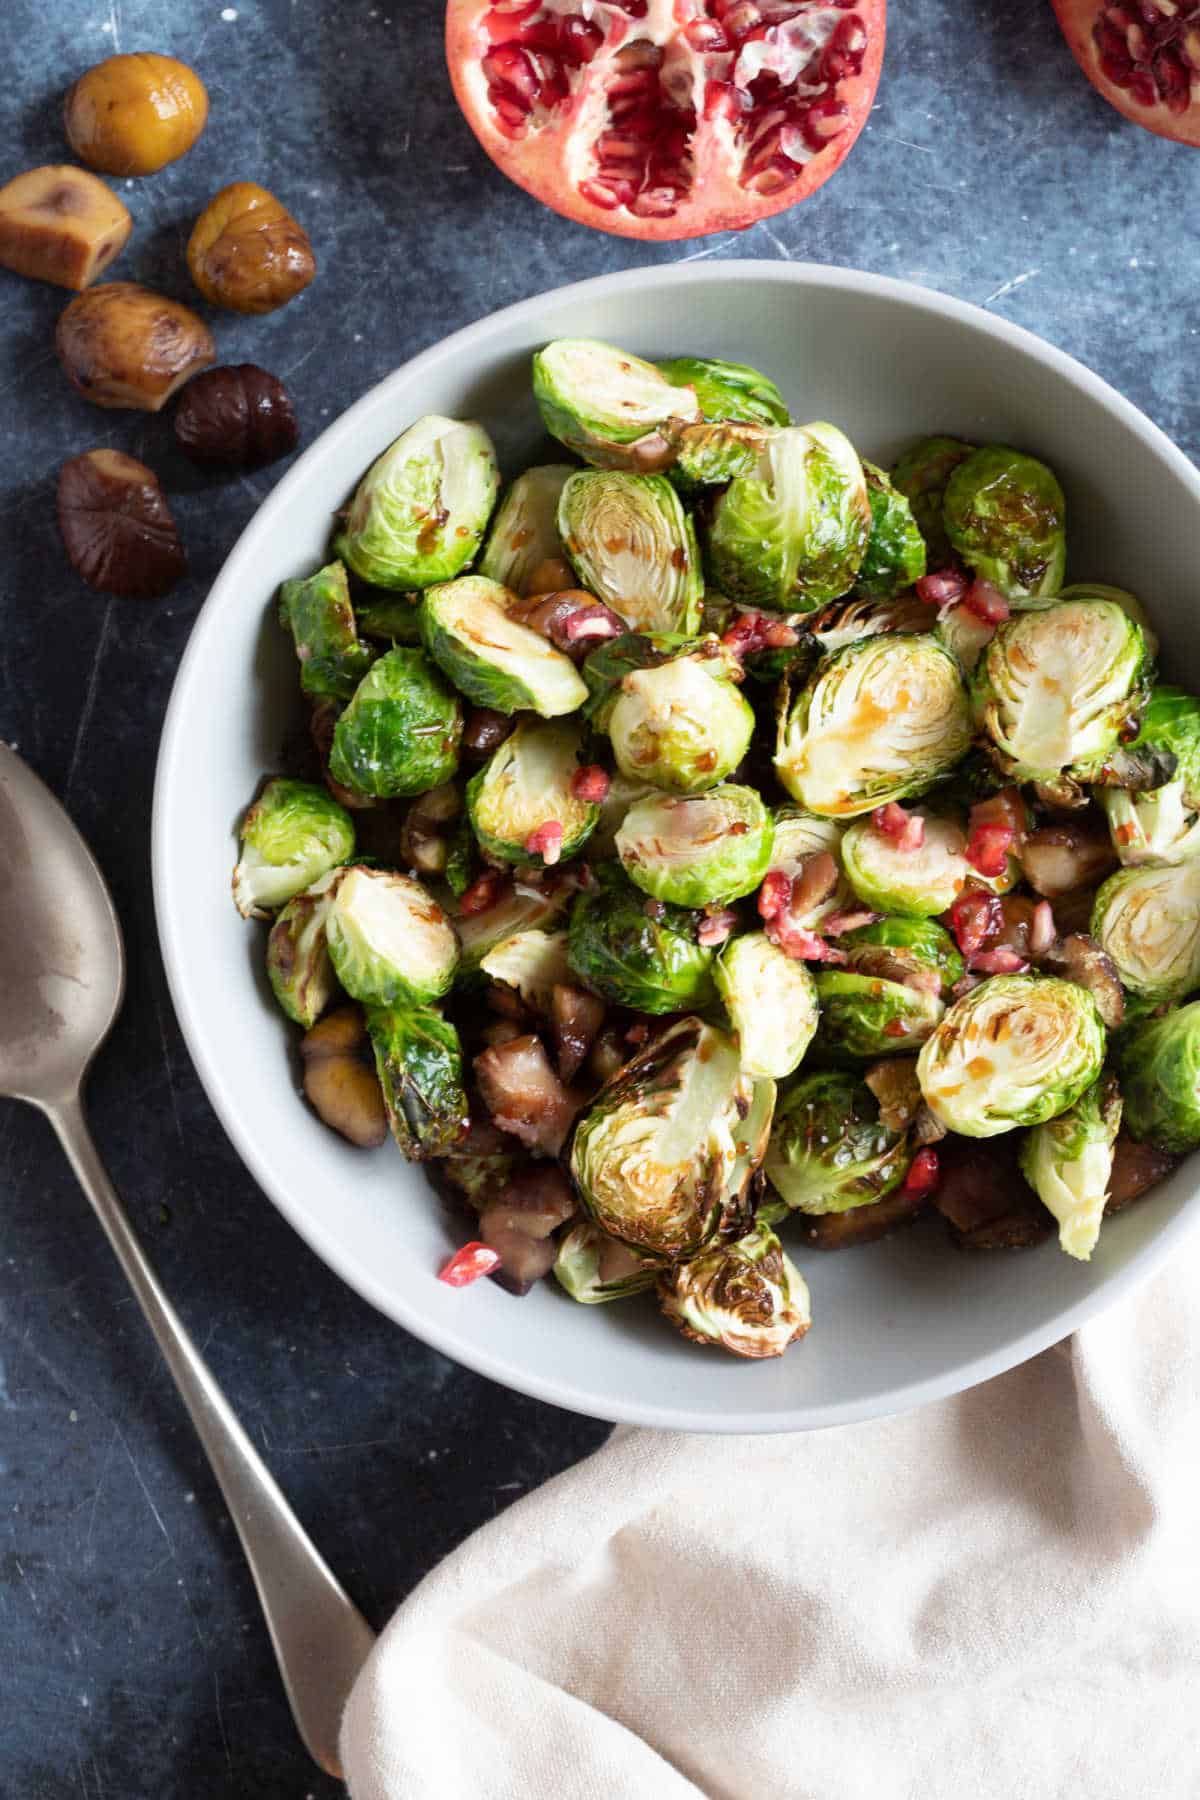 Air fryer Brussles sprouts in a grey bowl with pomegranate seeds.